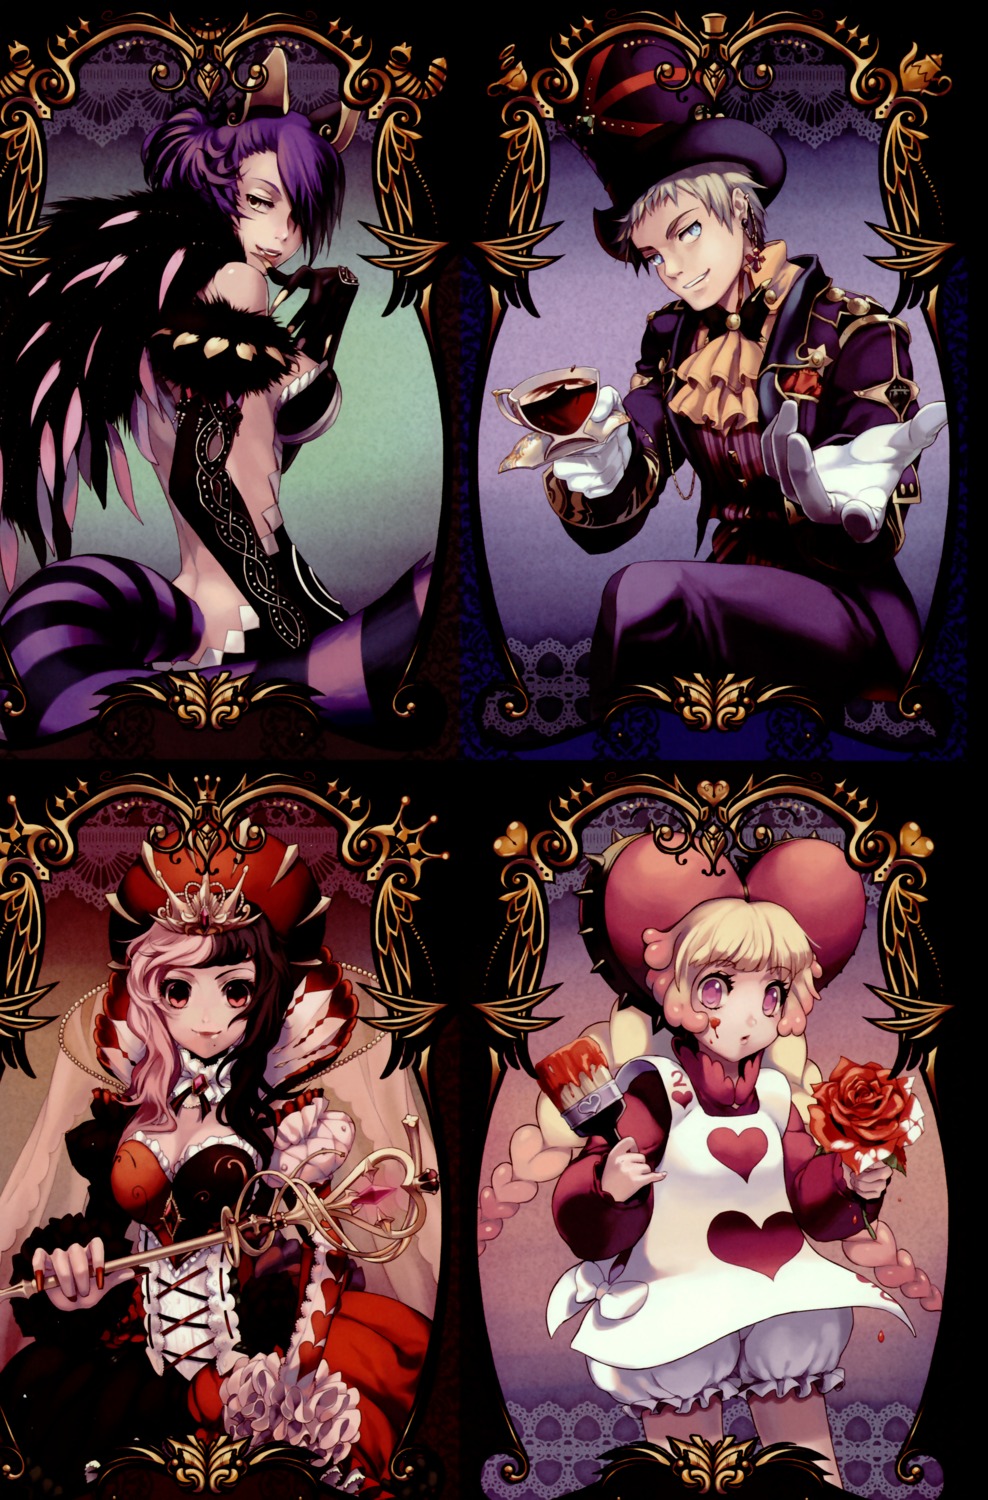 alice_in_wonderland bloomers cheshire_cat dress lim_gayeun mad_hatter queen_of_hearts